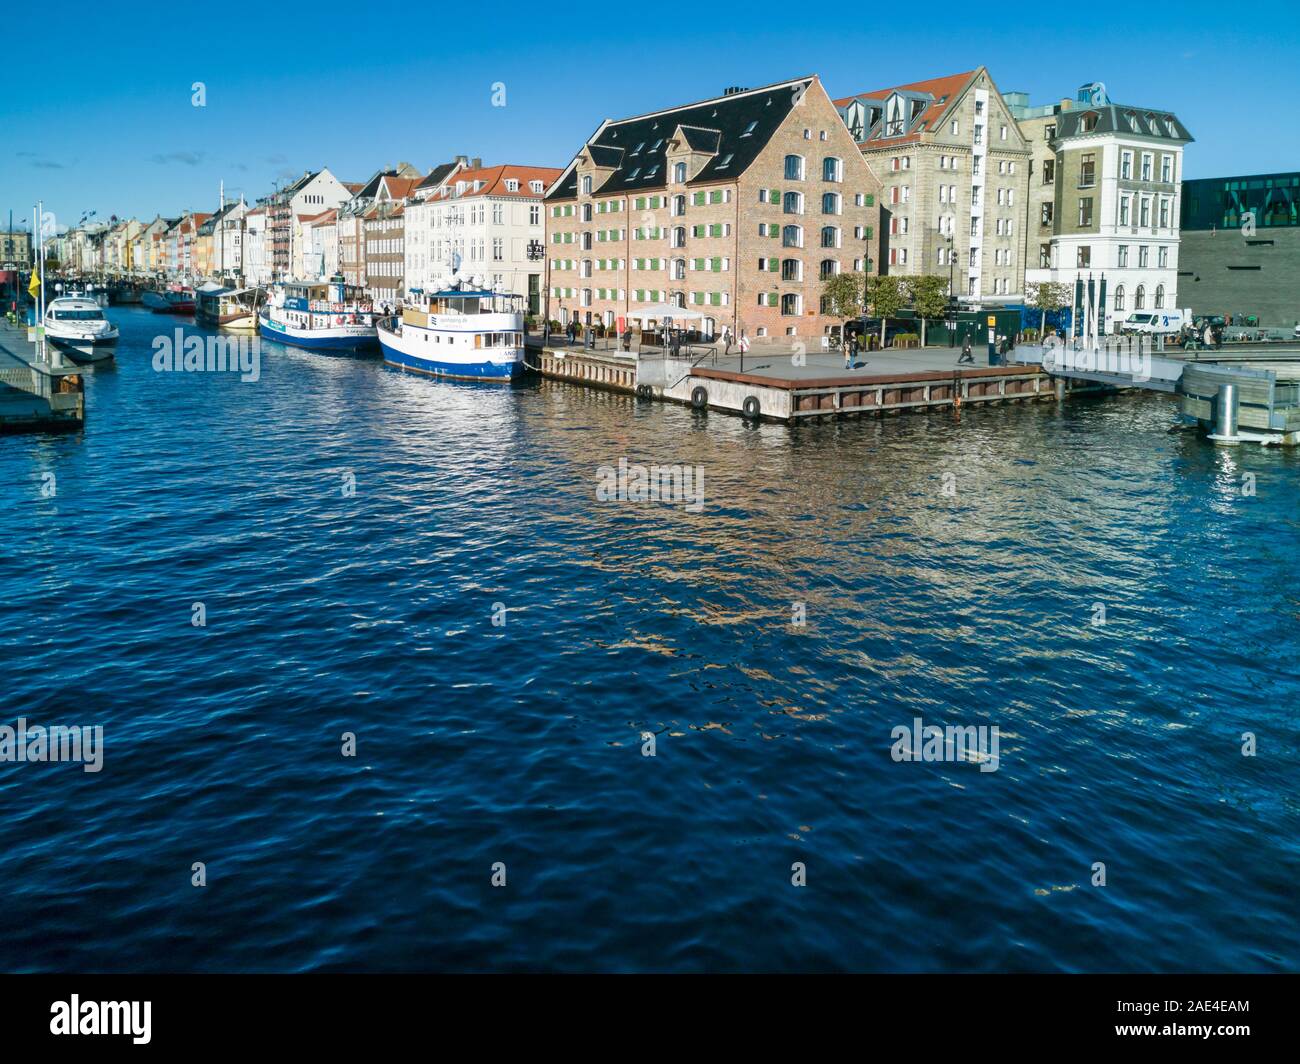 Nyhavn water front canal and touristic street in Copenhagen Stock Photo